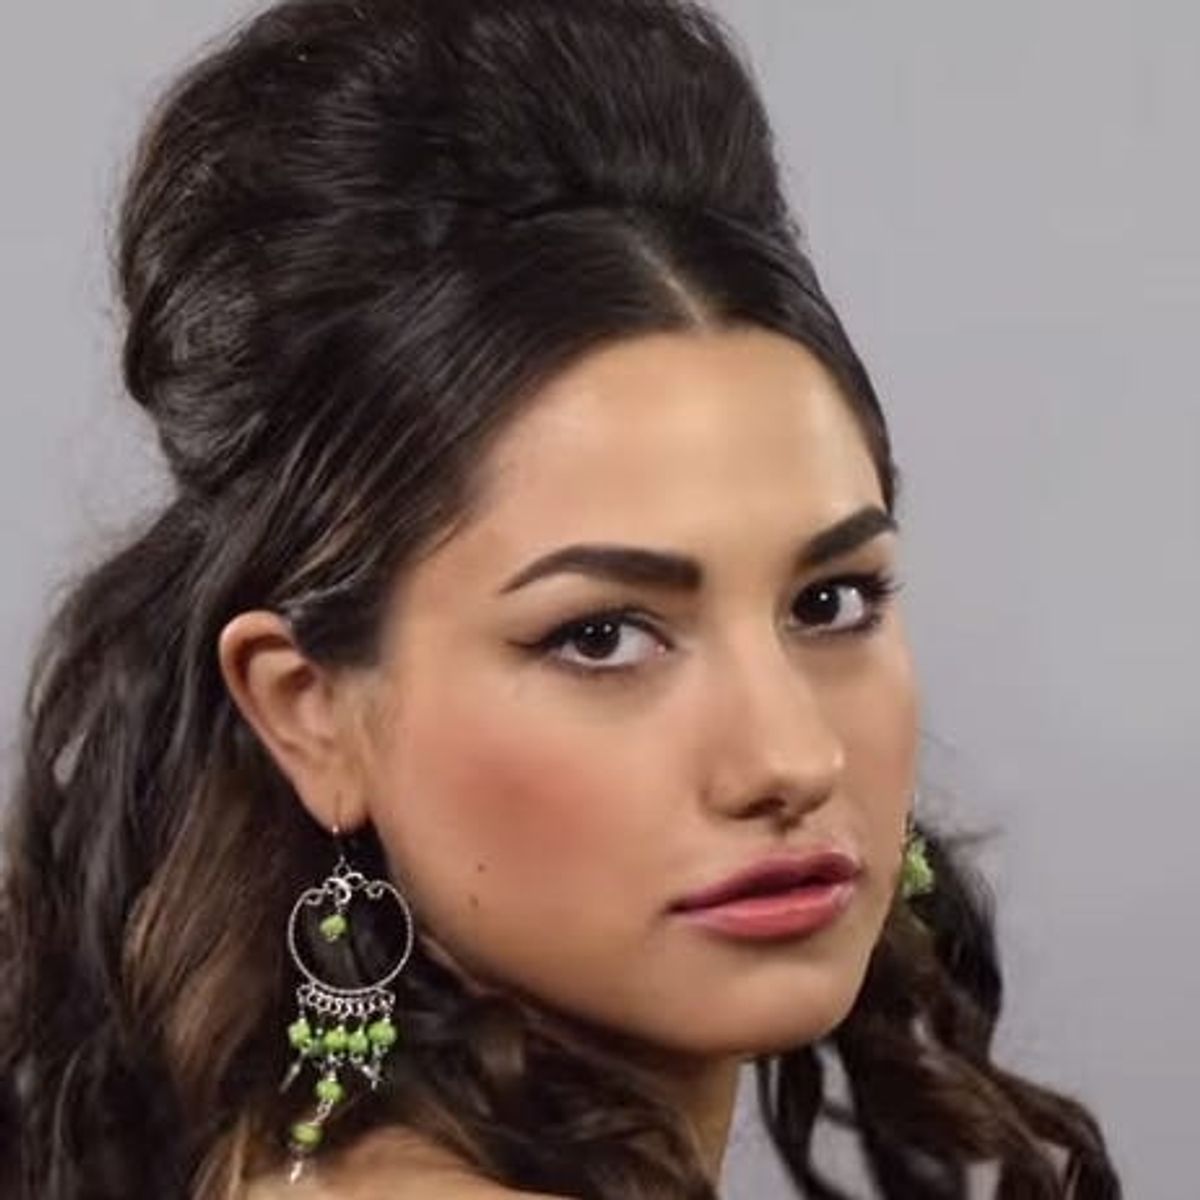 Watch 100 Years of Mexican Beauty Trends in Under a Minute